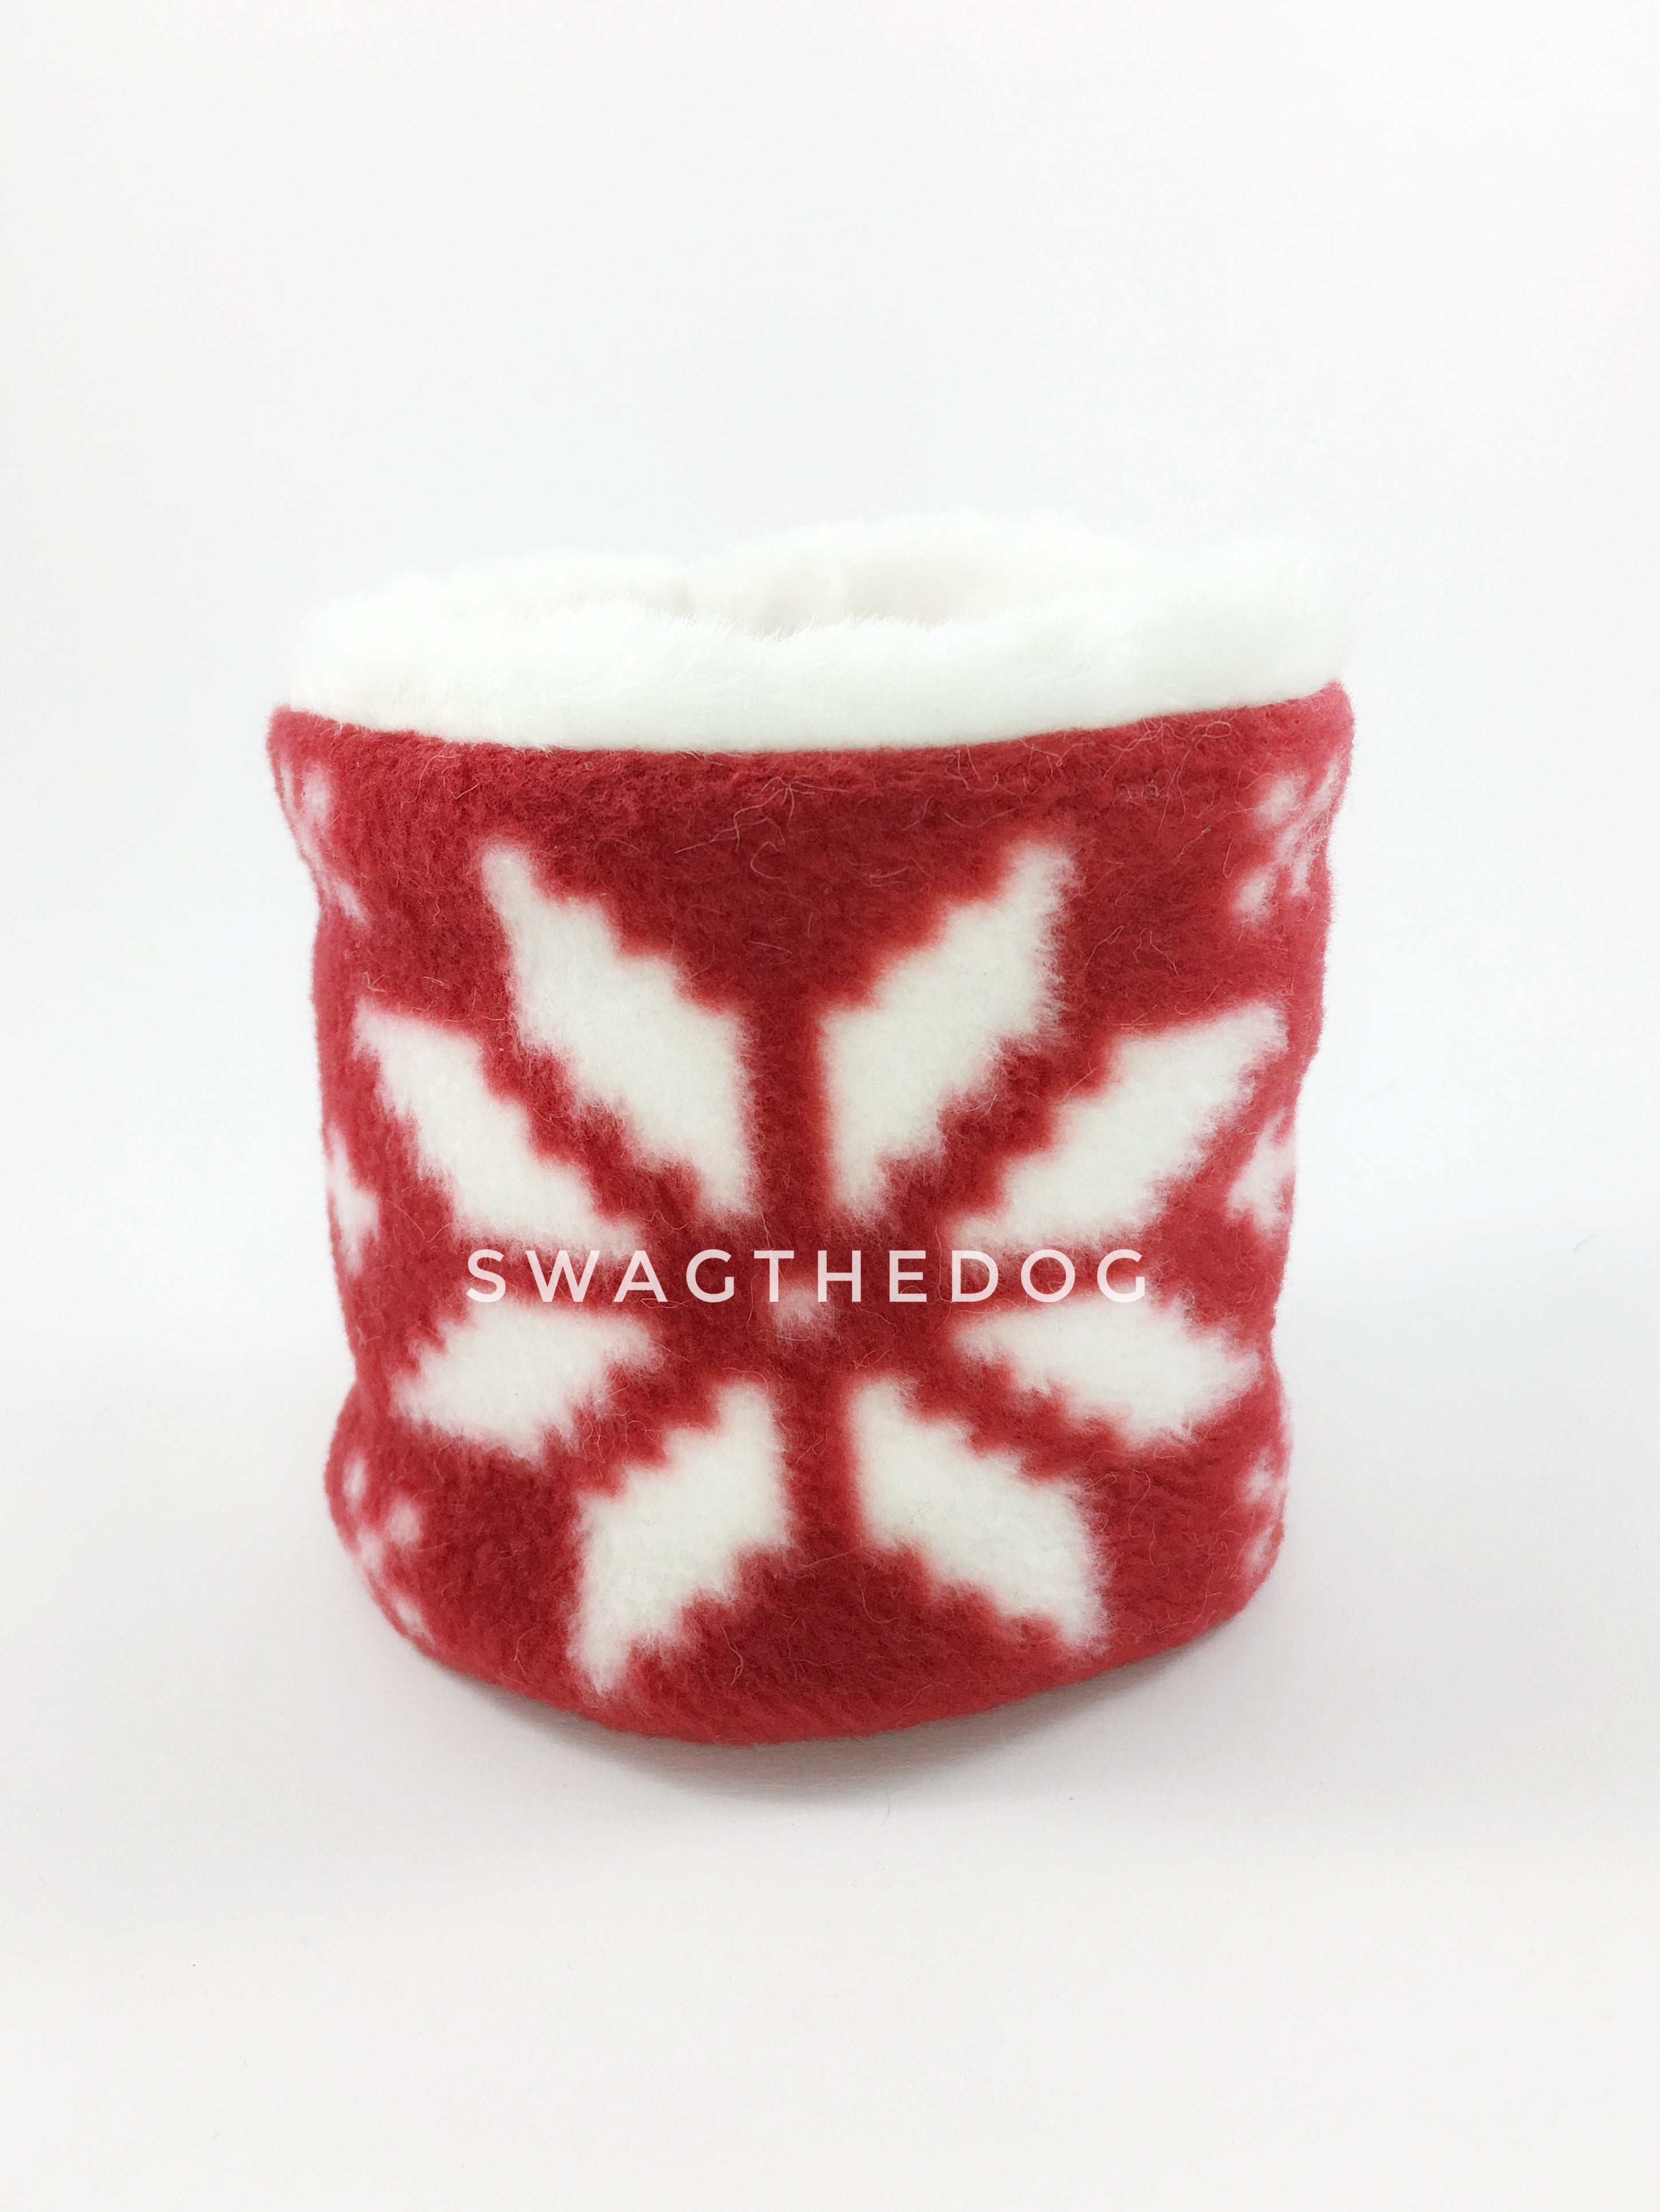 Red Holiday Swagsnood - Product Front View. Snowflake Print Fleece Dog Snood and cream faux fur peeking out